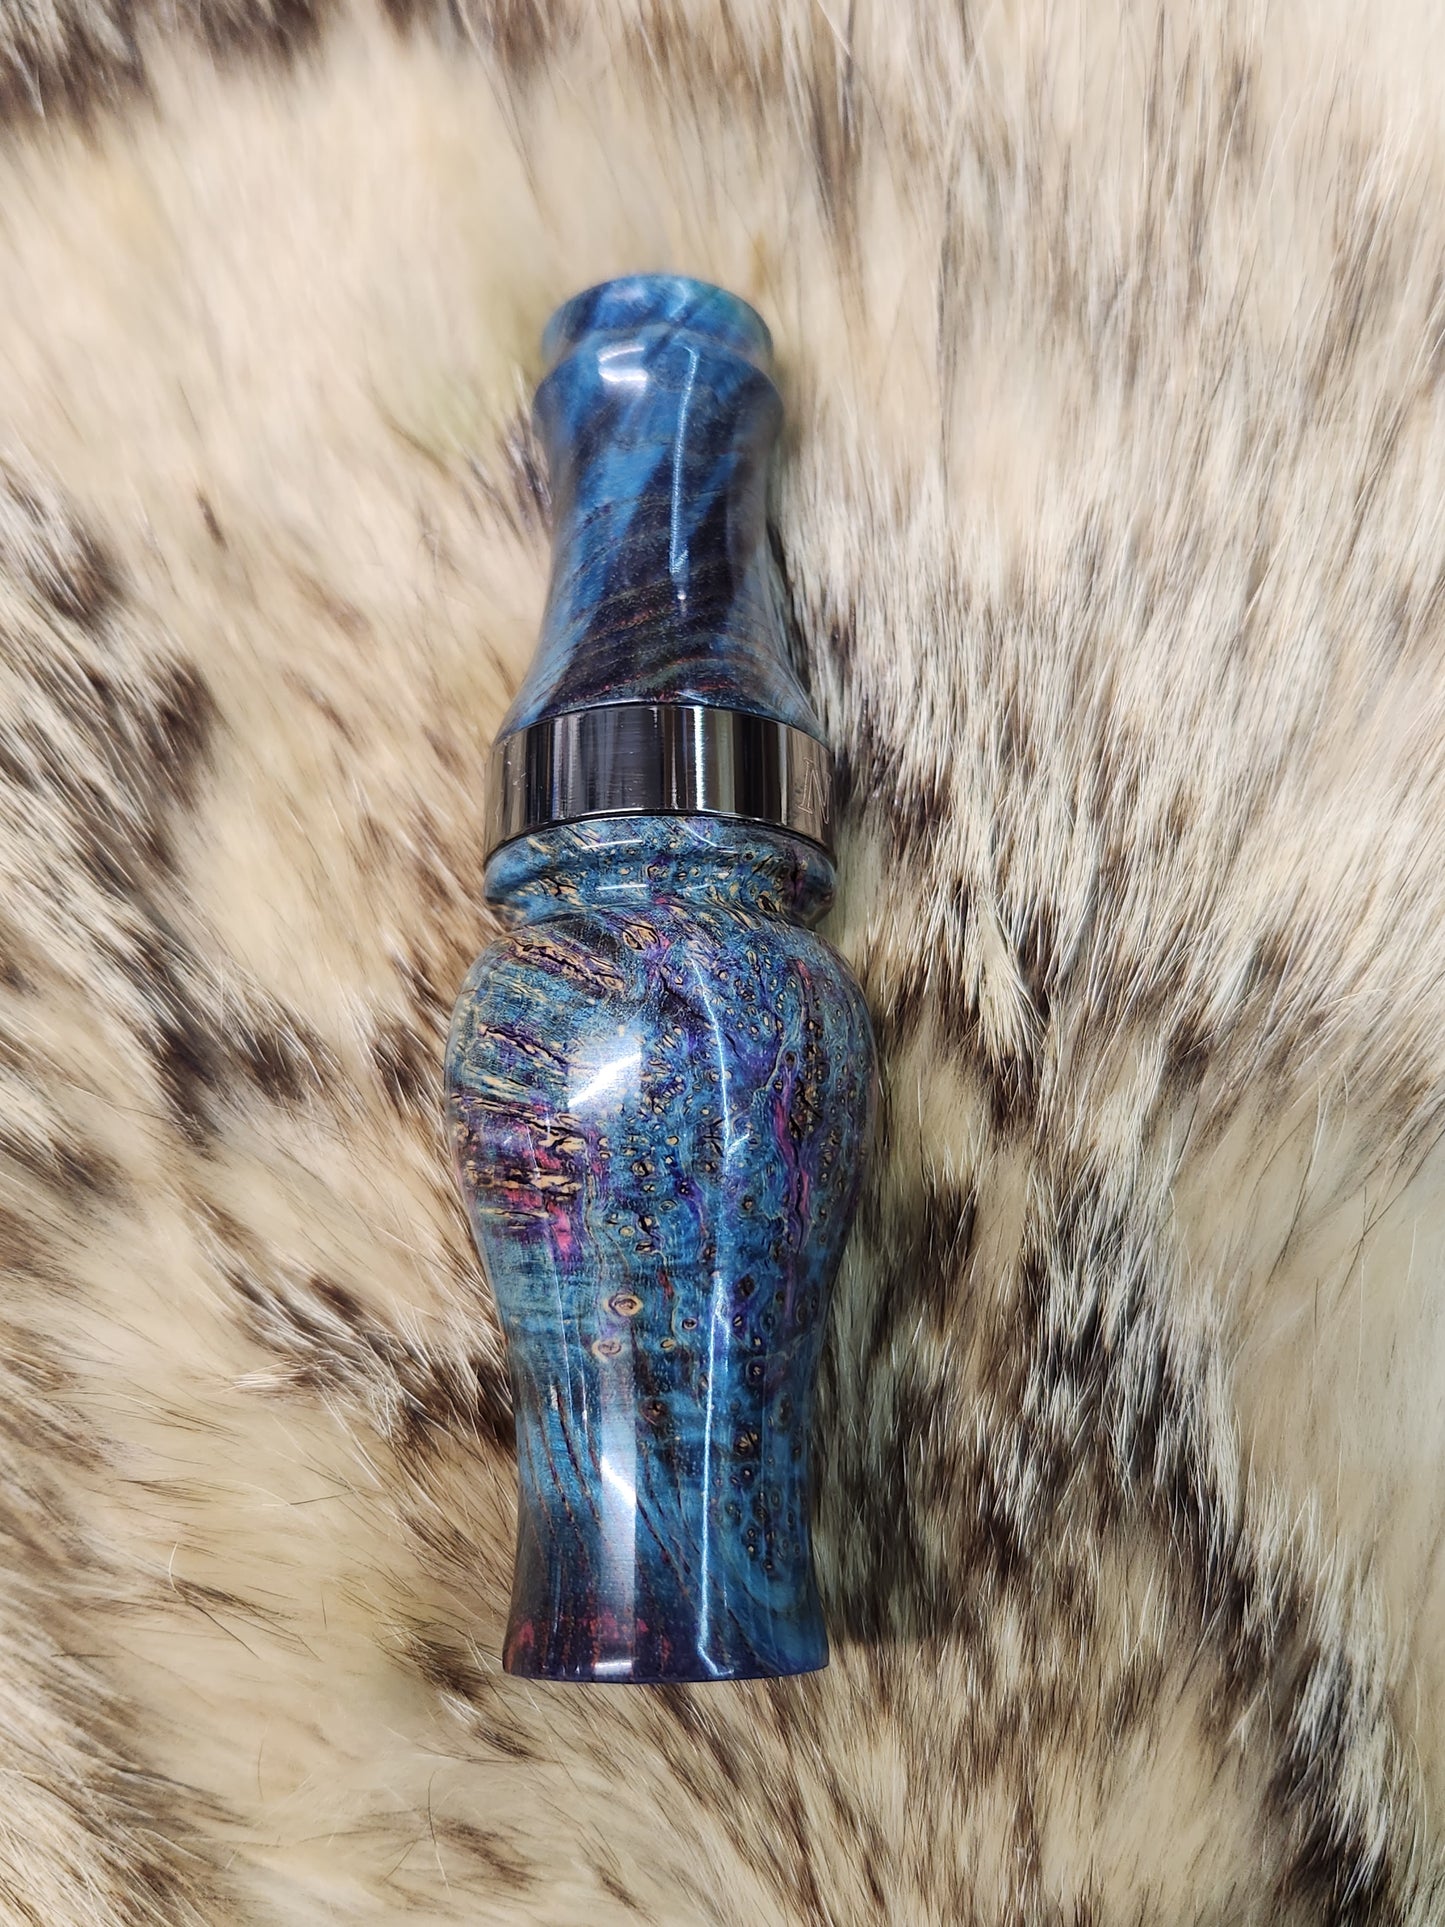 Black ash burl Double reed Duck Call